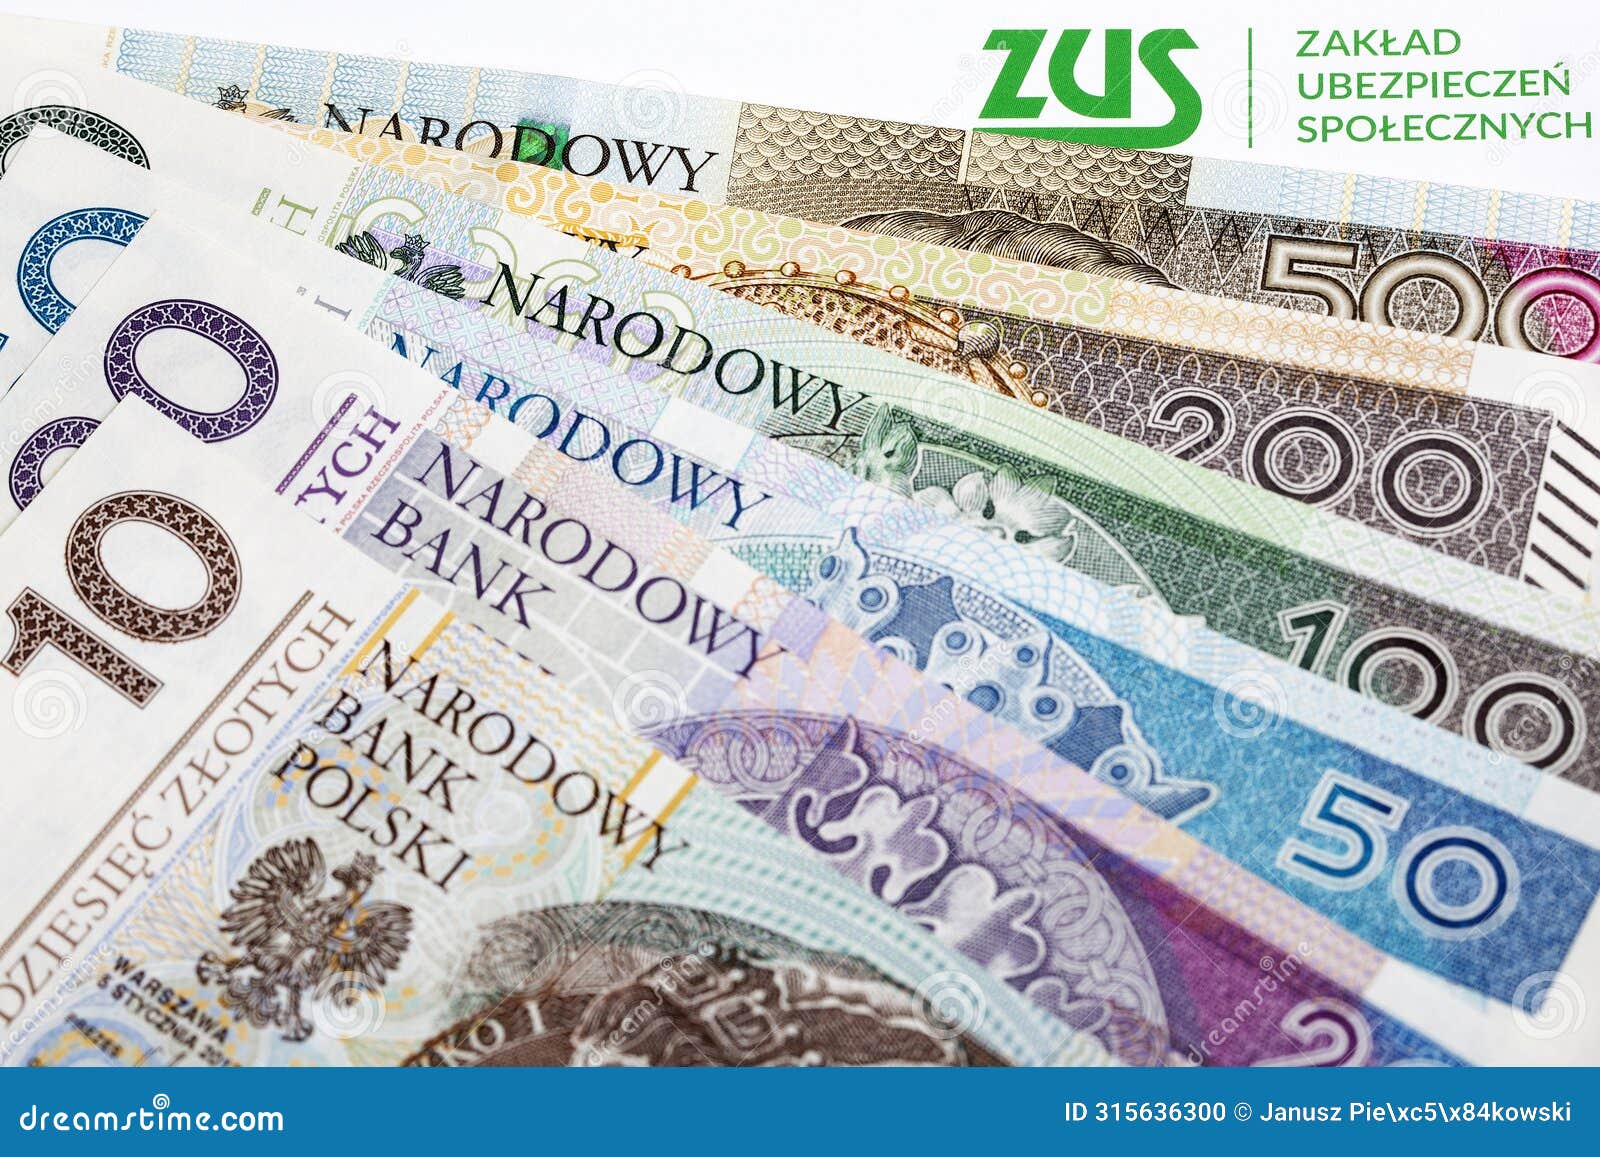 zus - polish social insurance institution - on the background of the polish zloty